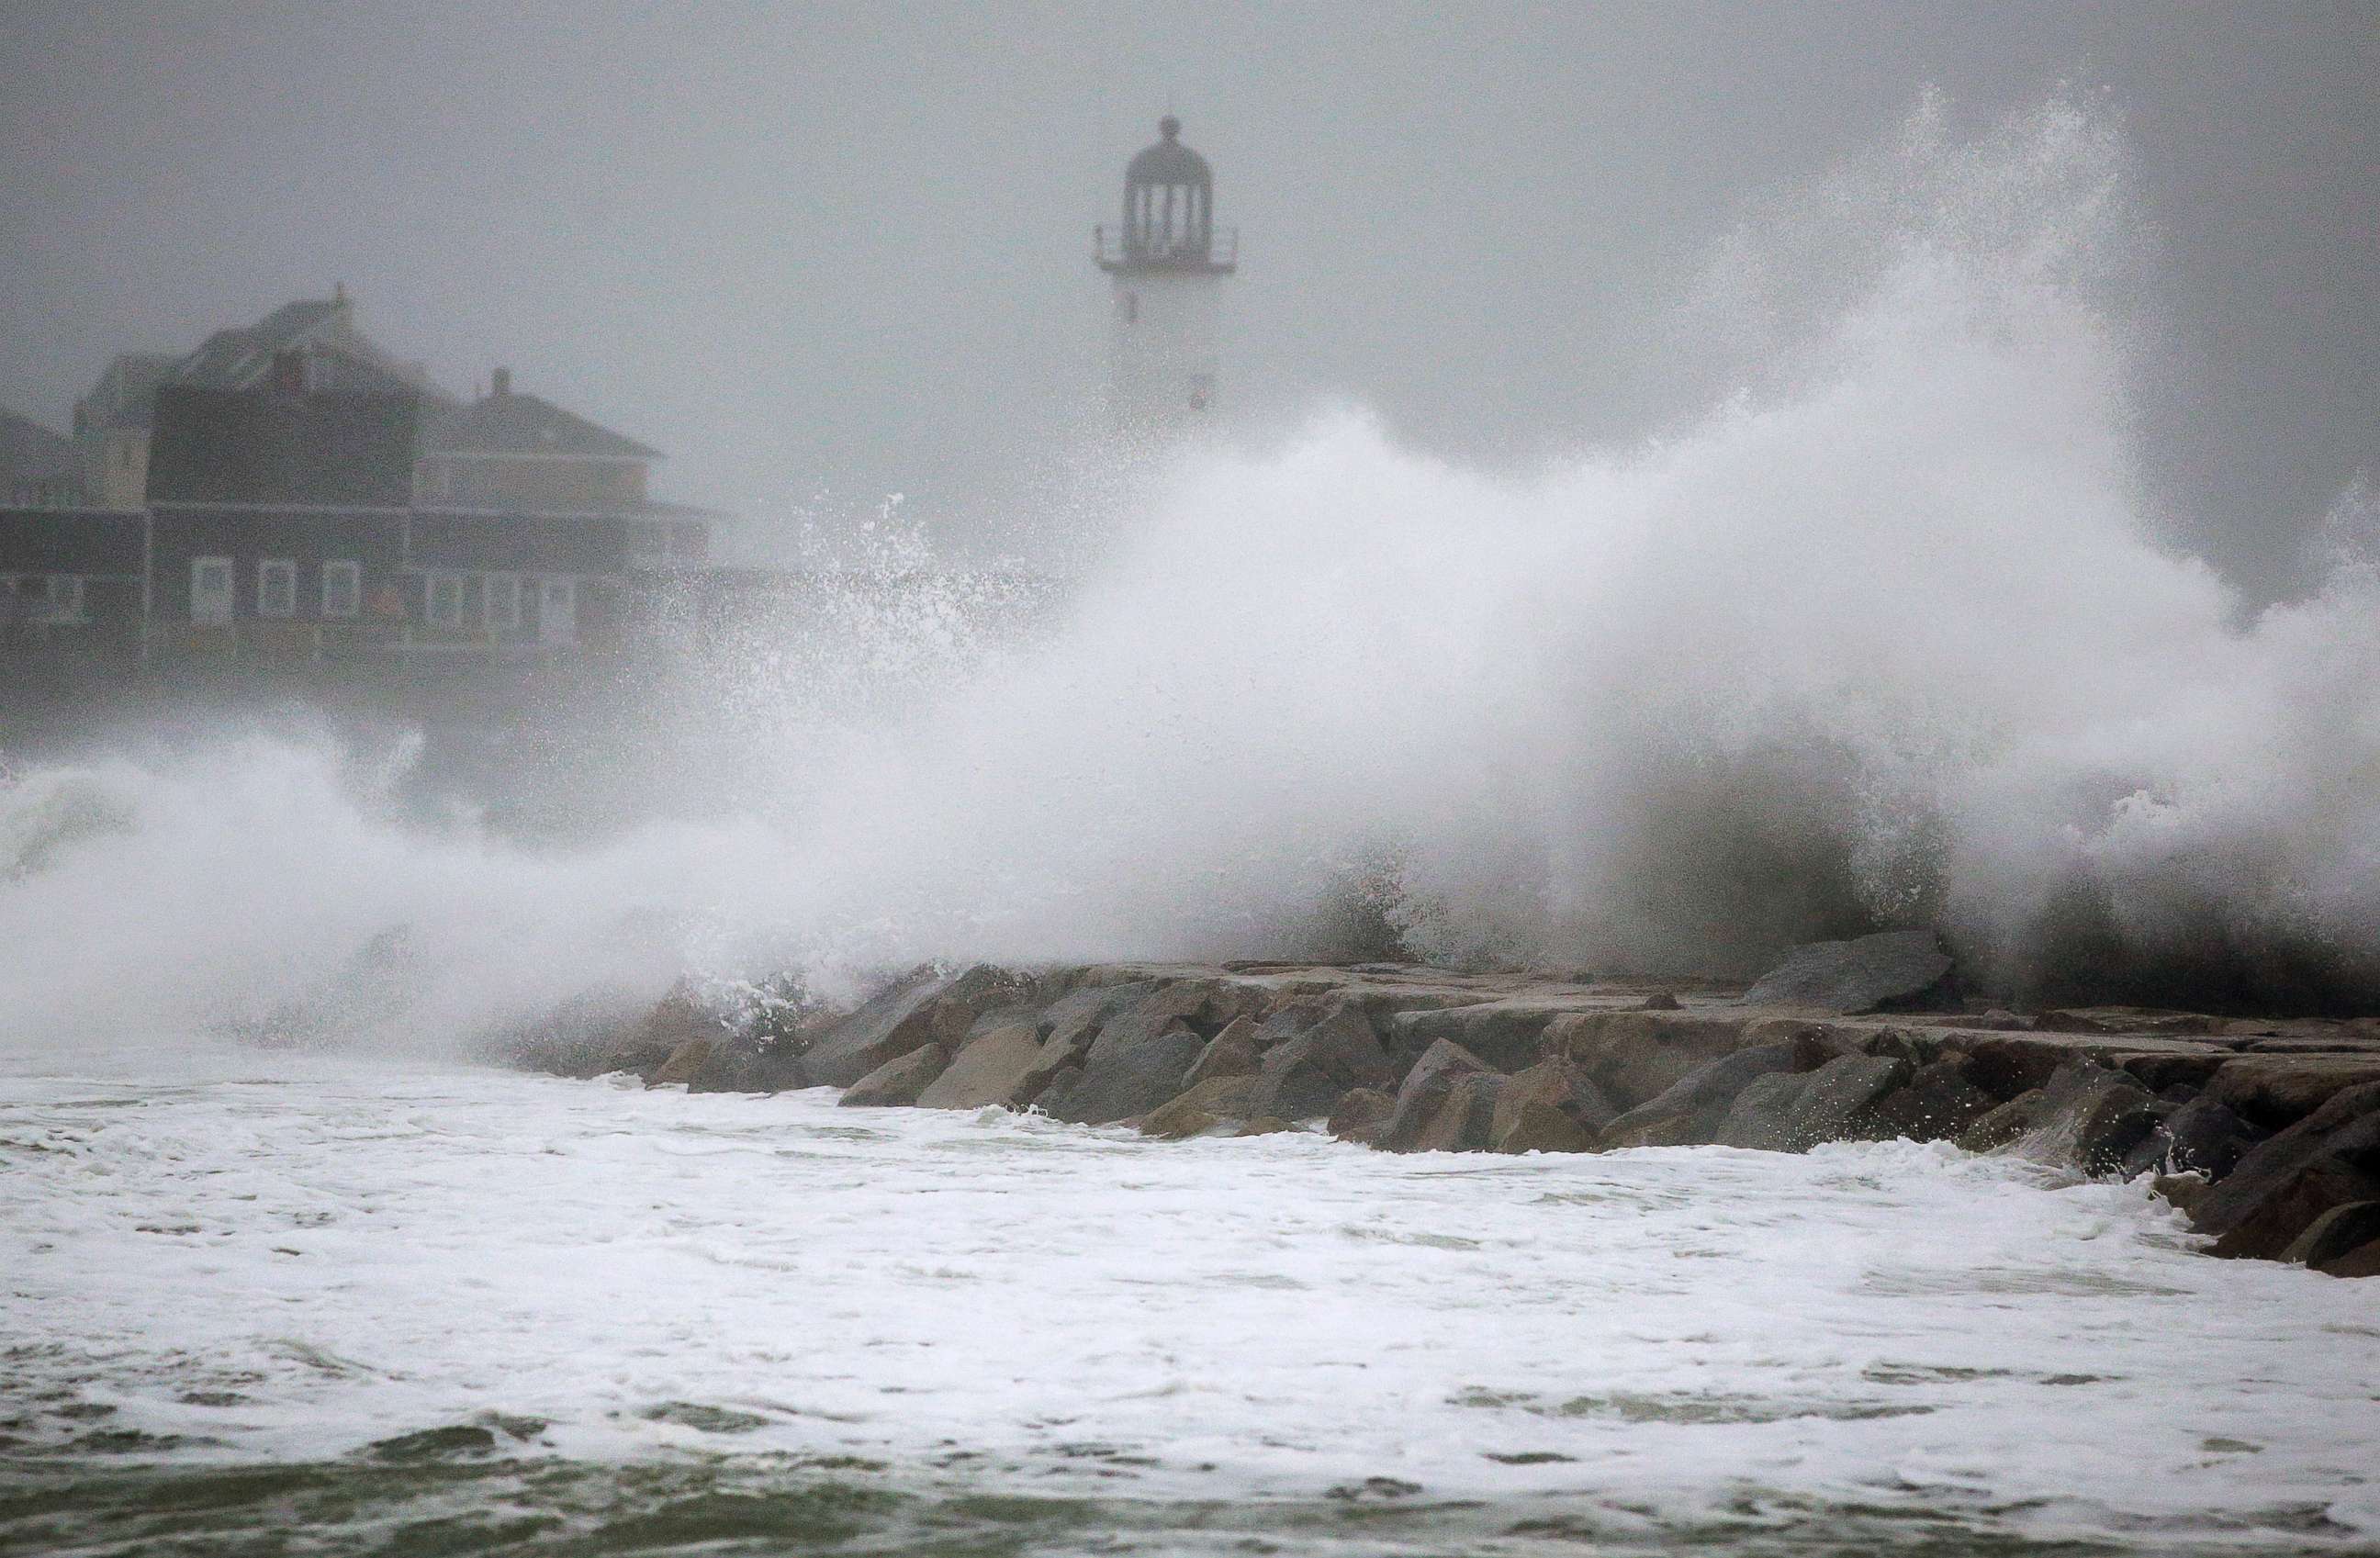 PHOTO: Waves crash against a seawall near the Scituate Lighthouse, March 2, 2018, in Scituate, Mass.